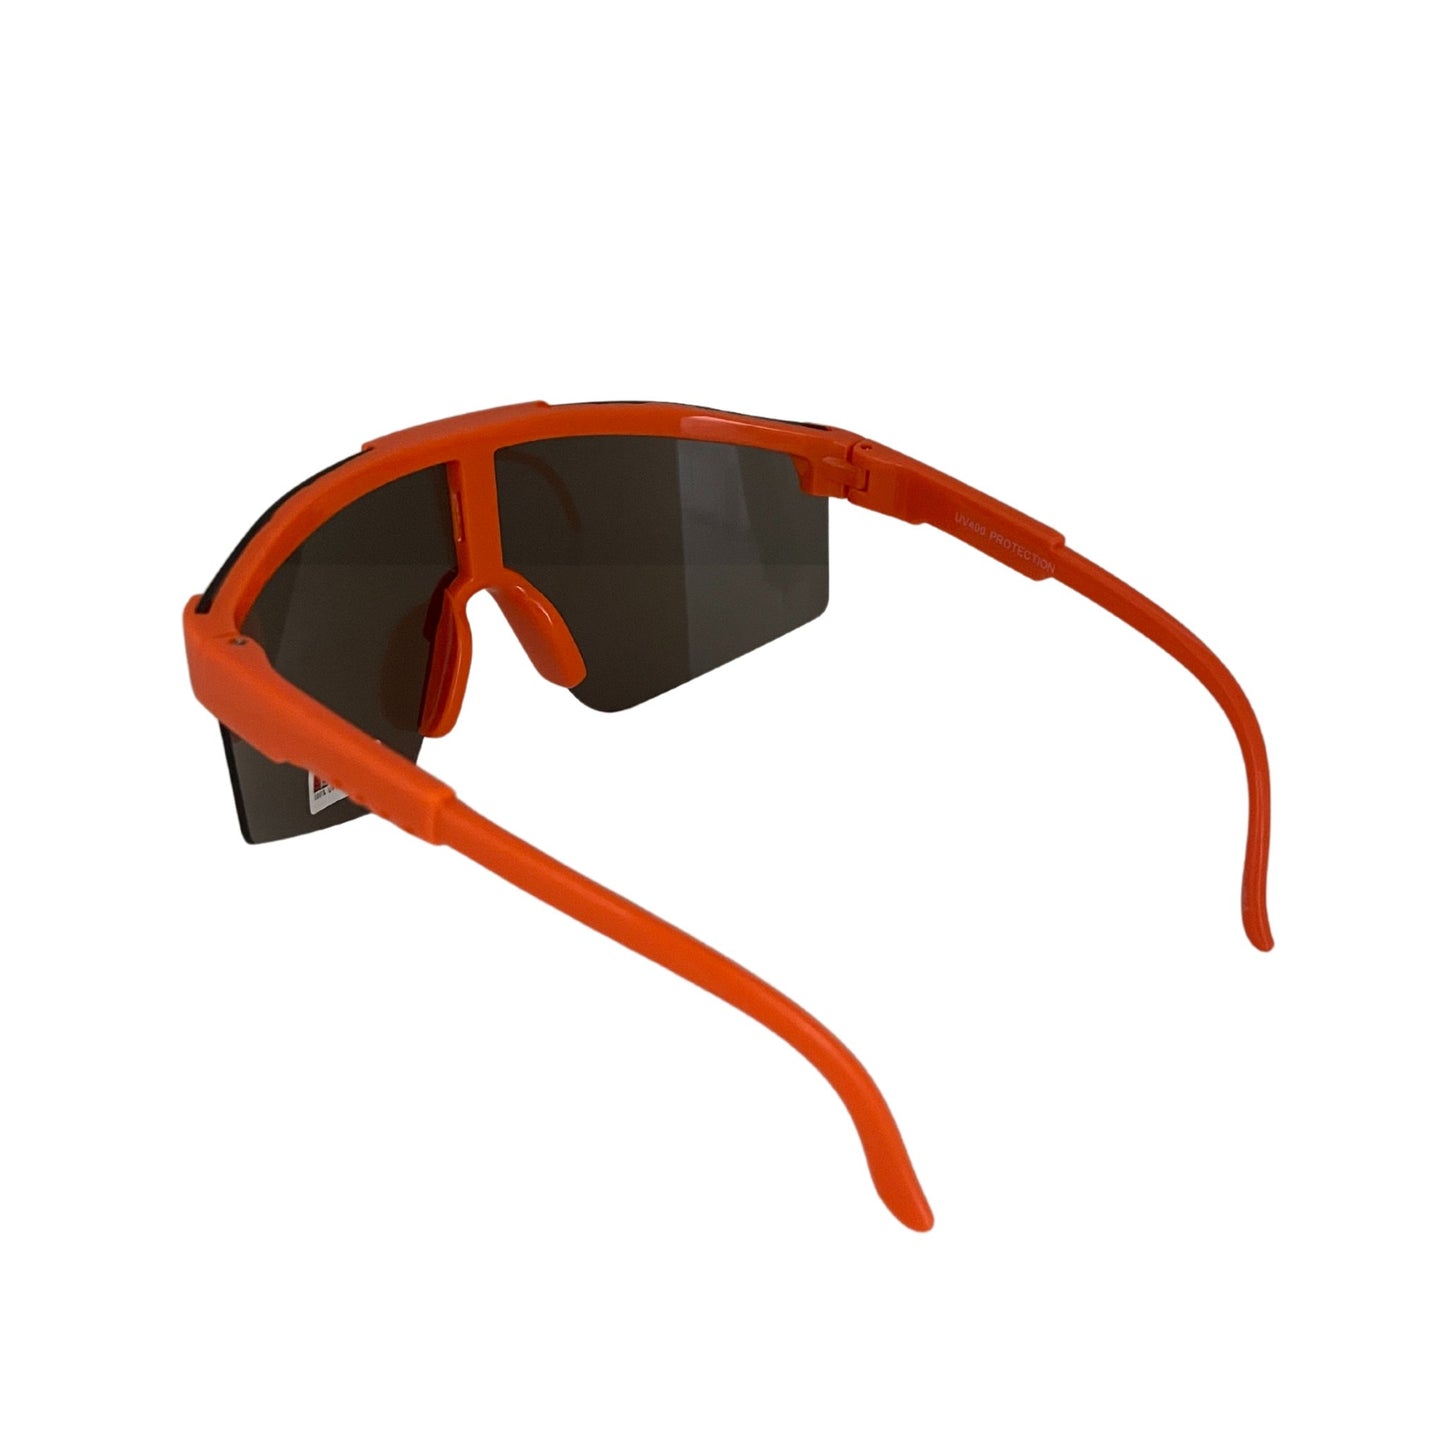 Kids Bright Polycarbonate Shield Sunglasses - What's the 4-1-1